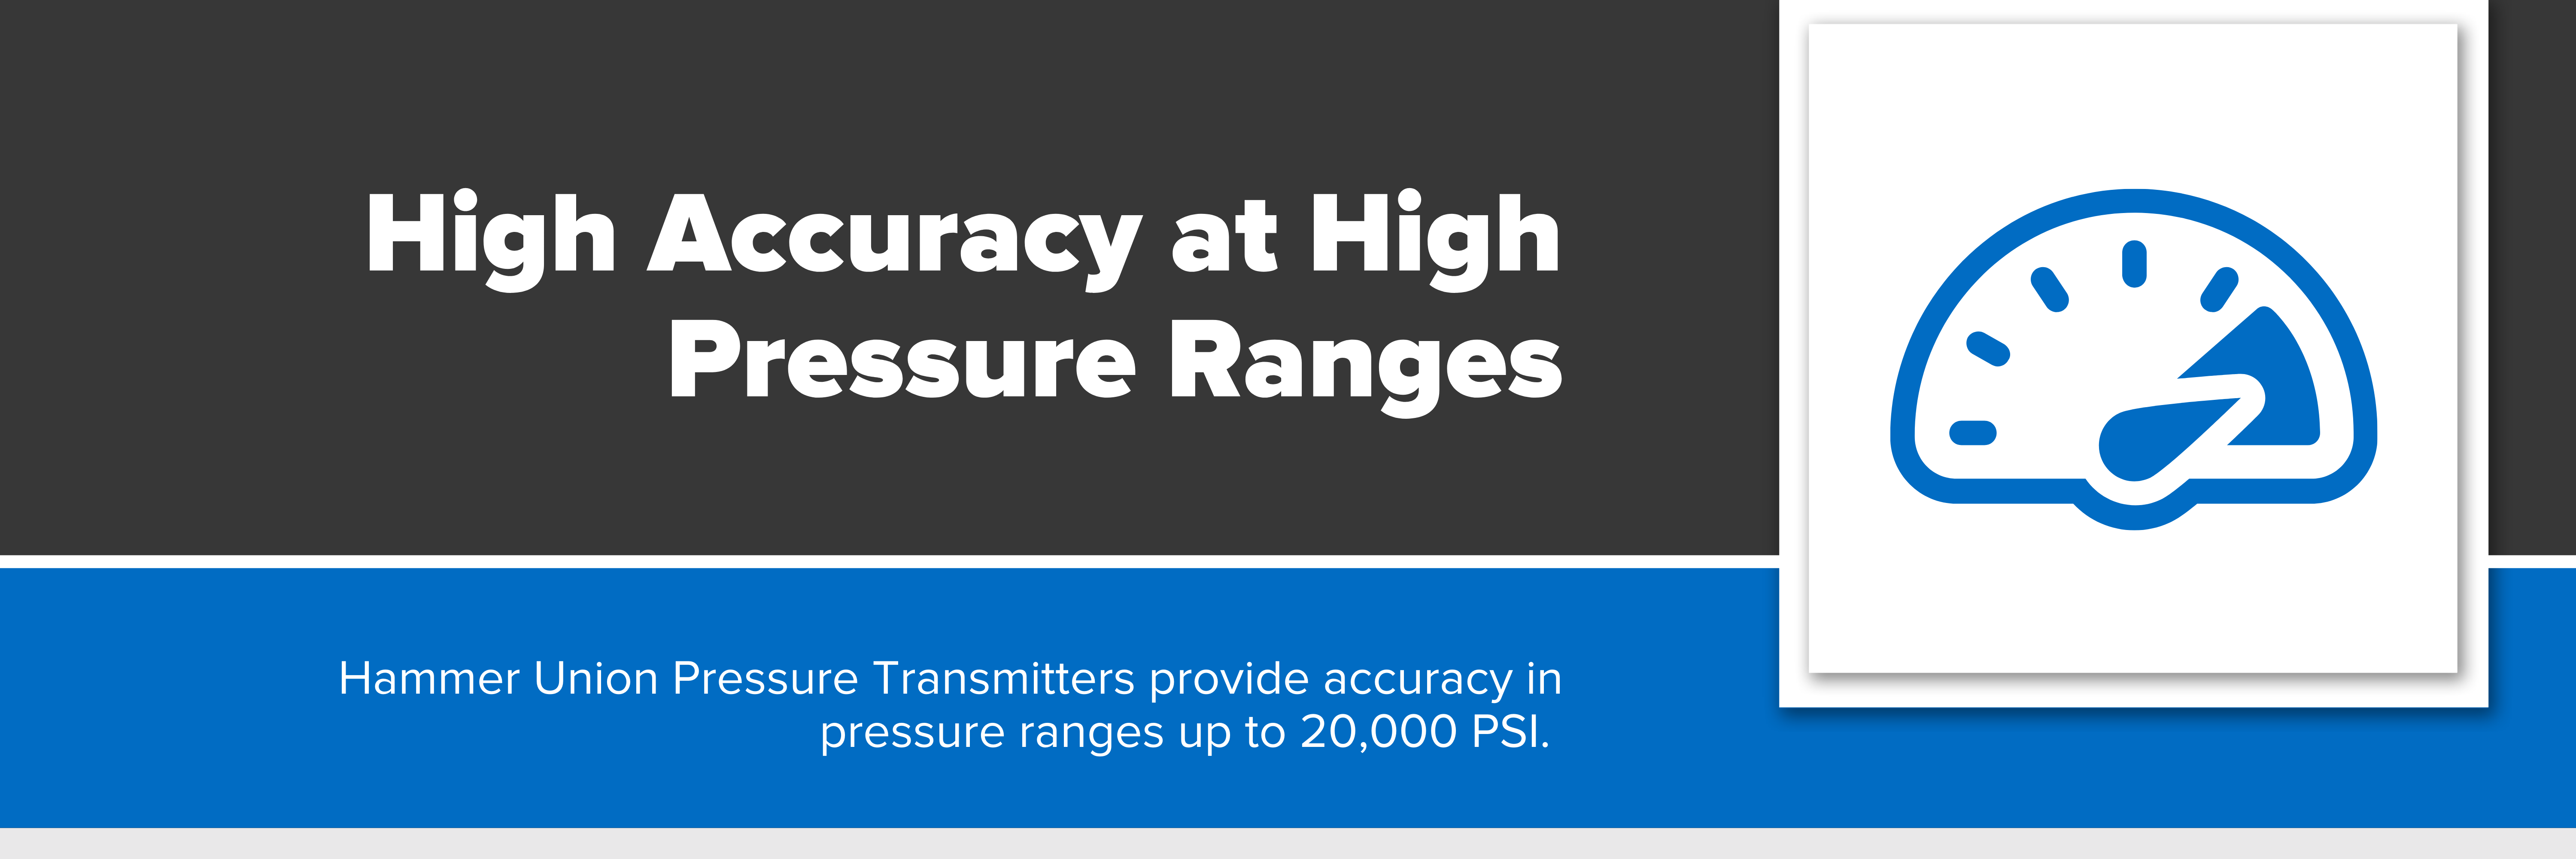 Header image with text "high accuracy at high pressure ranges"